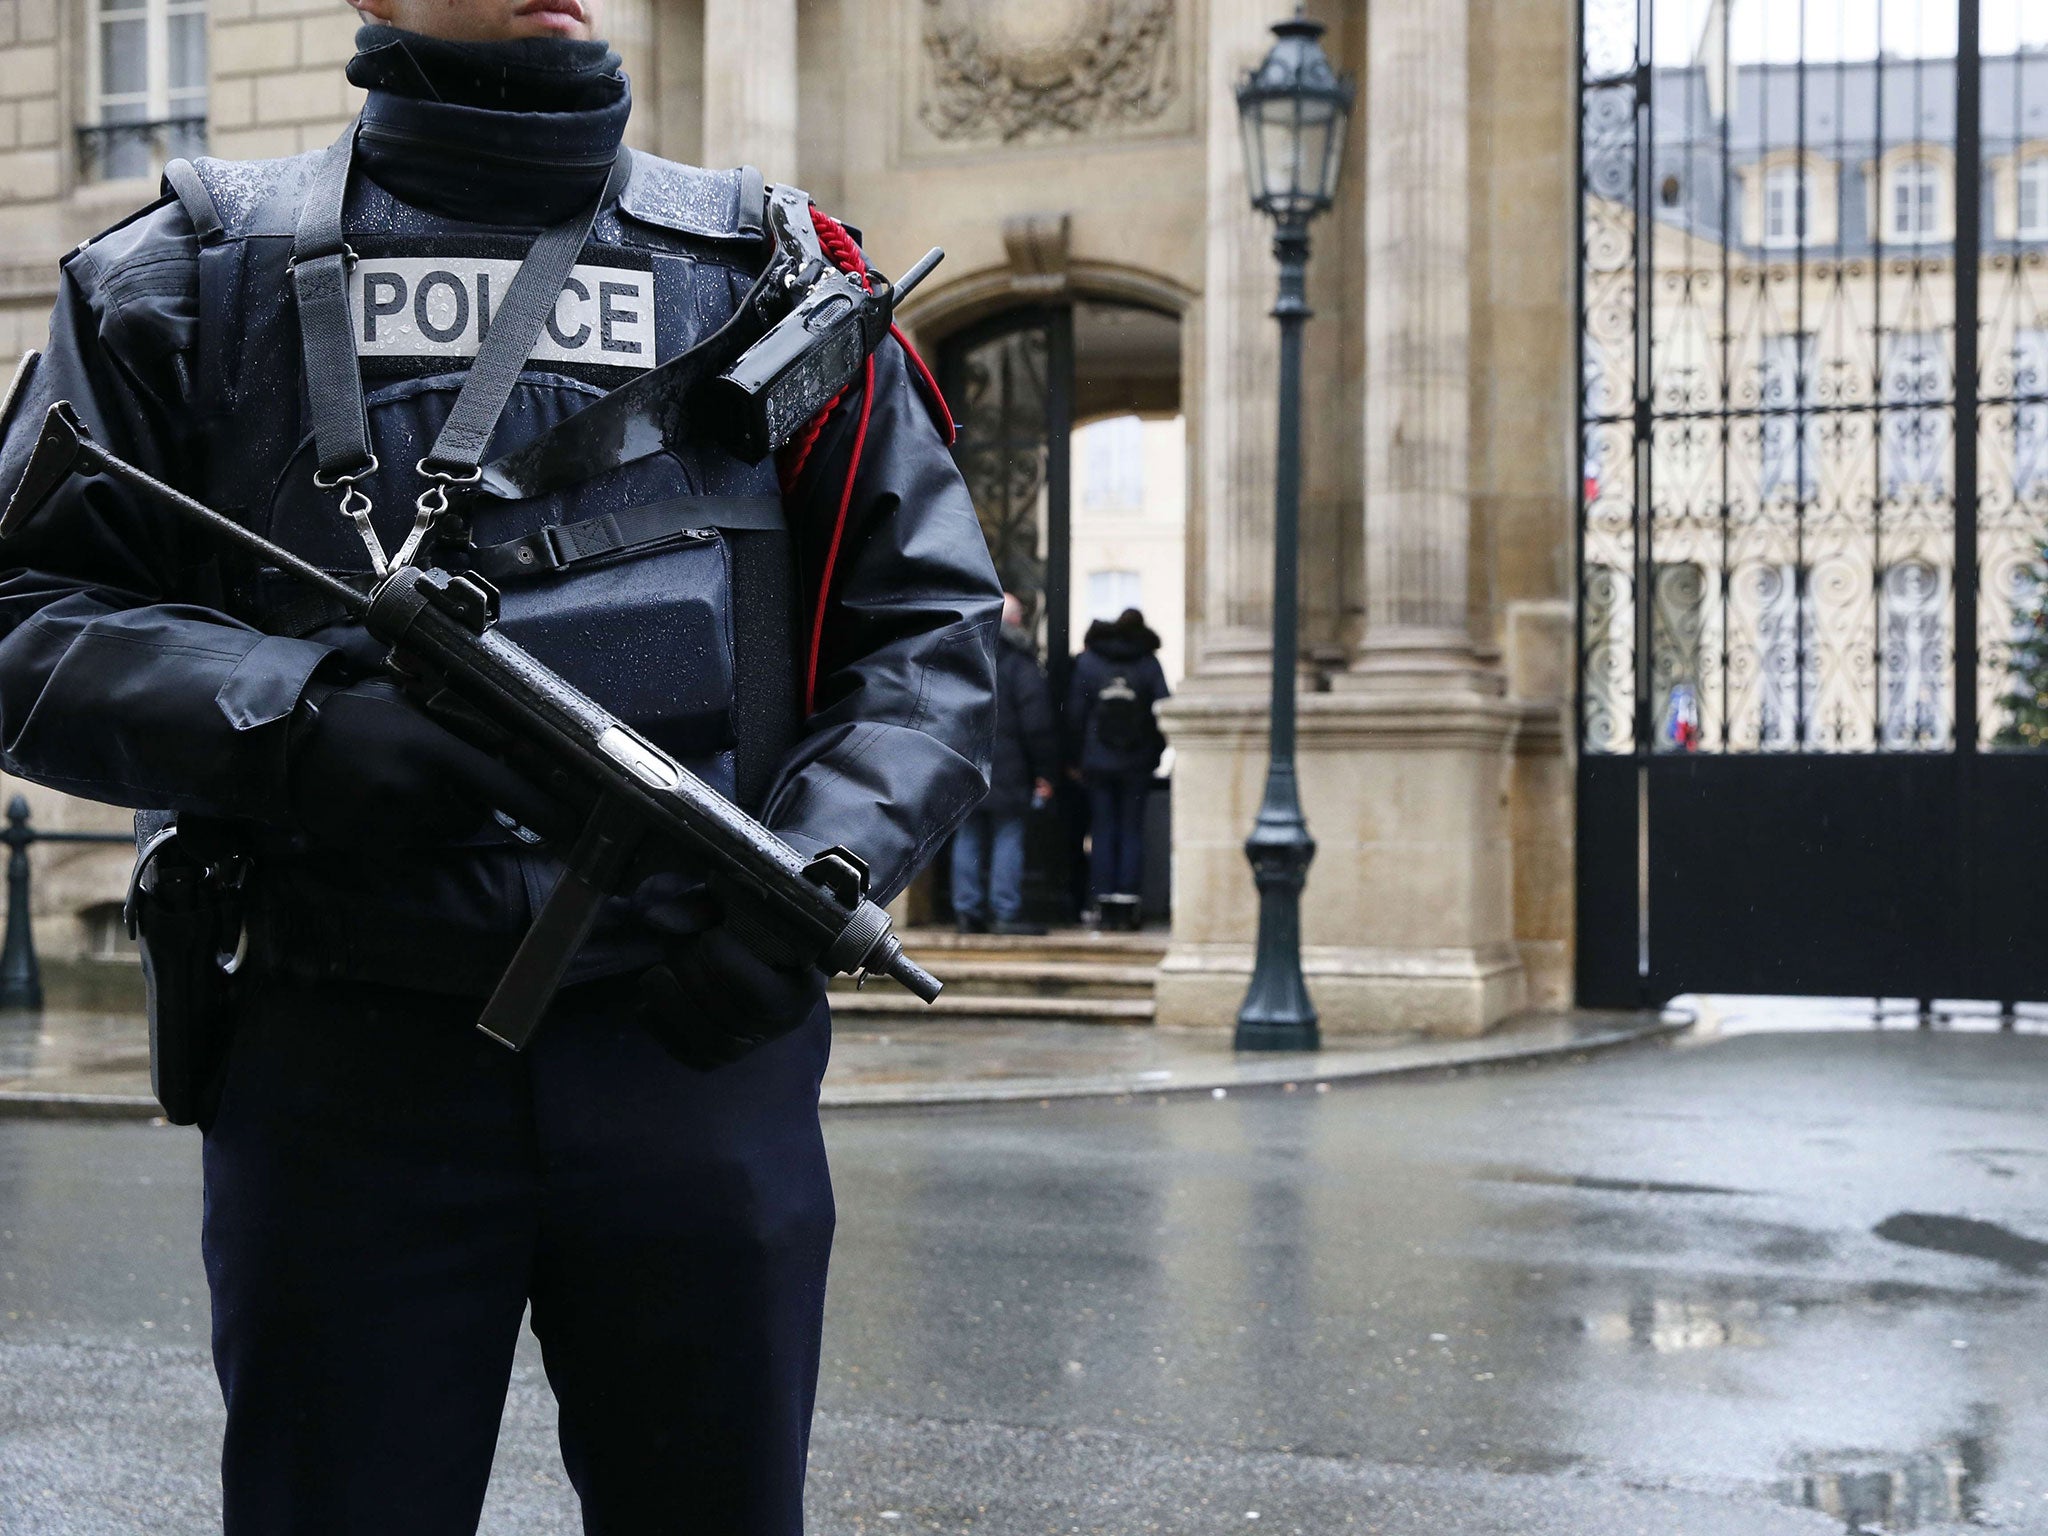 A policeman stand guard in front of the Elysee Palace as part of the highest level of 'Vigipirate' security plan in Paris, January 8, 2015, the day after a shooting at the Paris offices of weekly satirical newspaper Charlie Hebdo